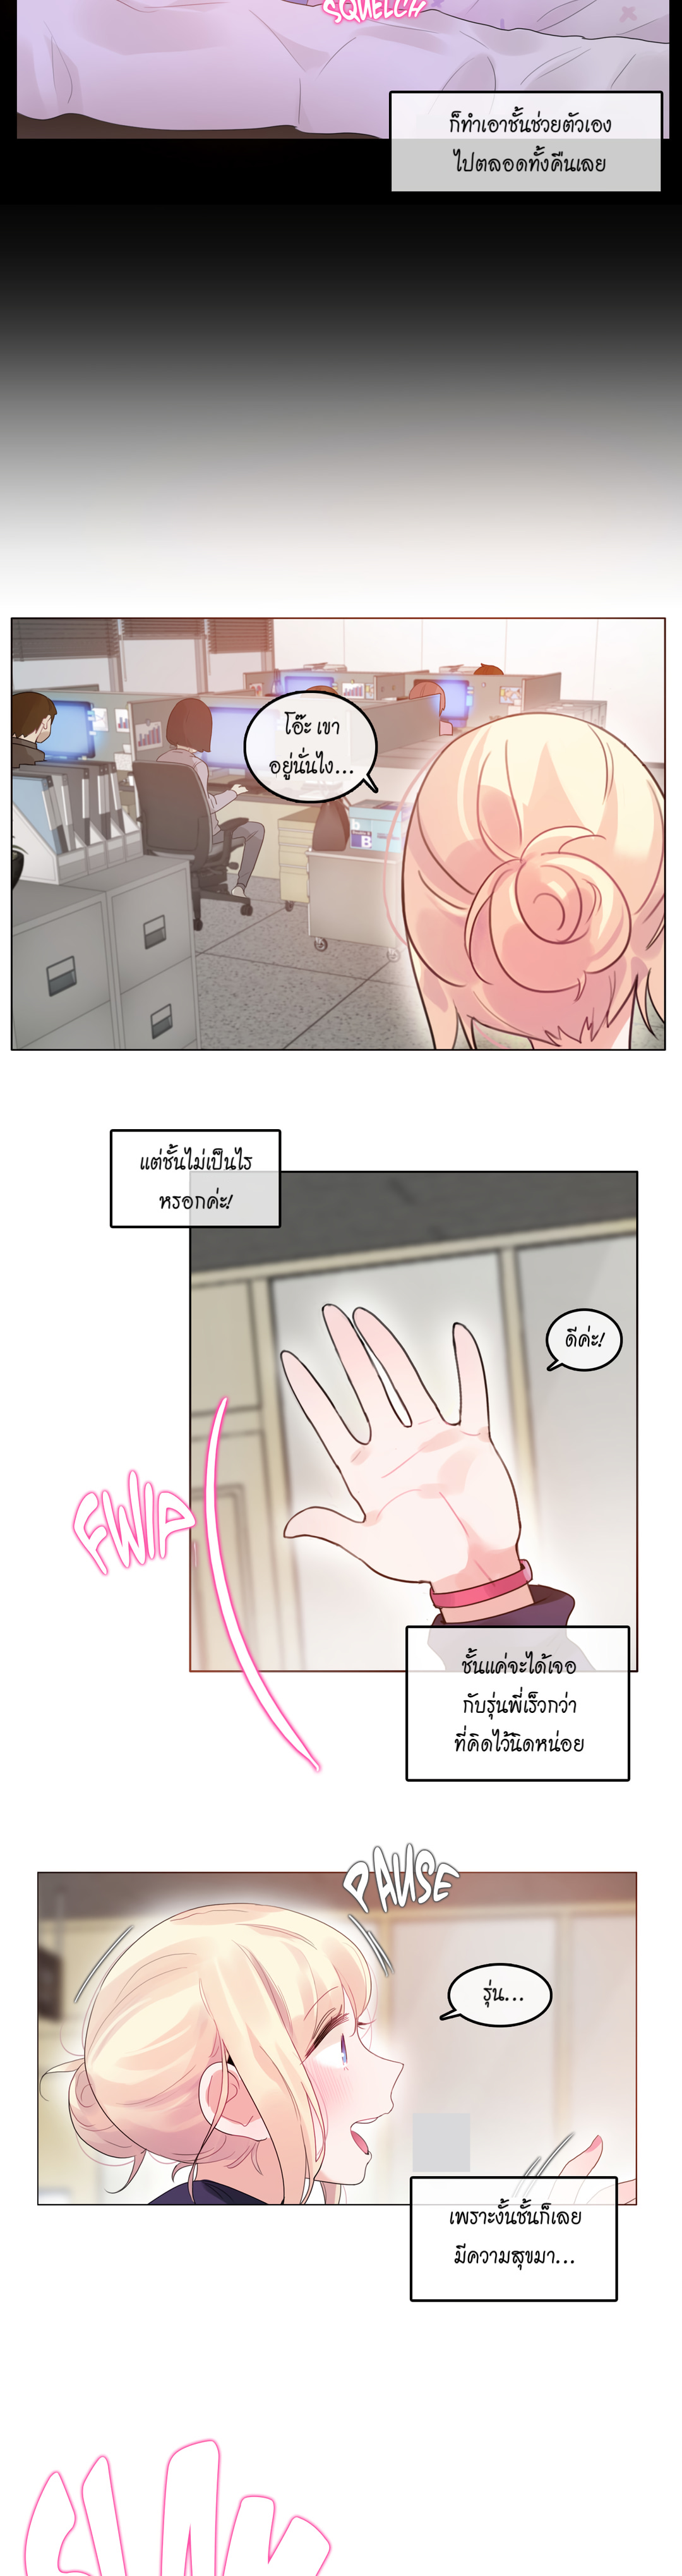 A Pervert’s Daily Life53 (3)